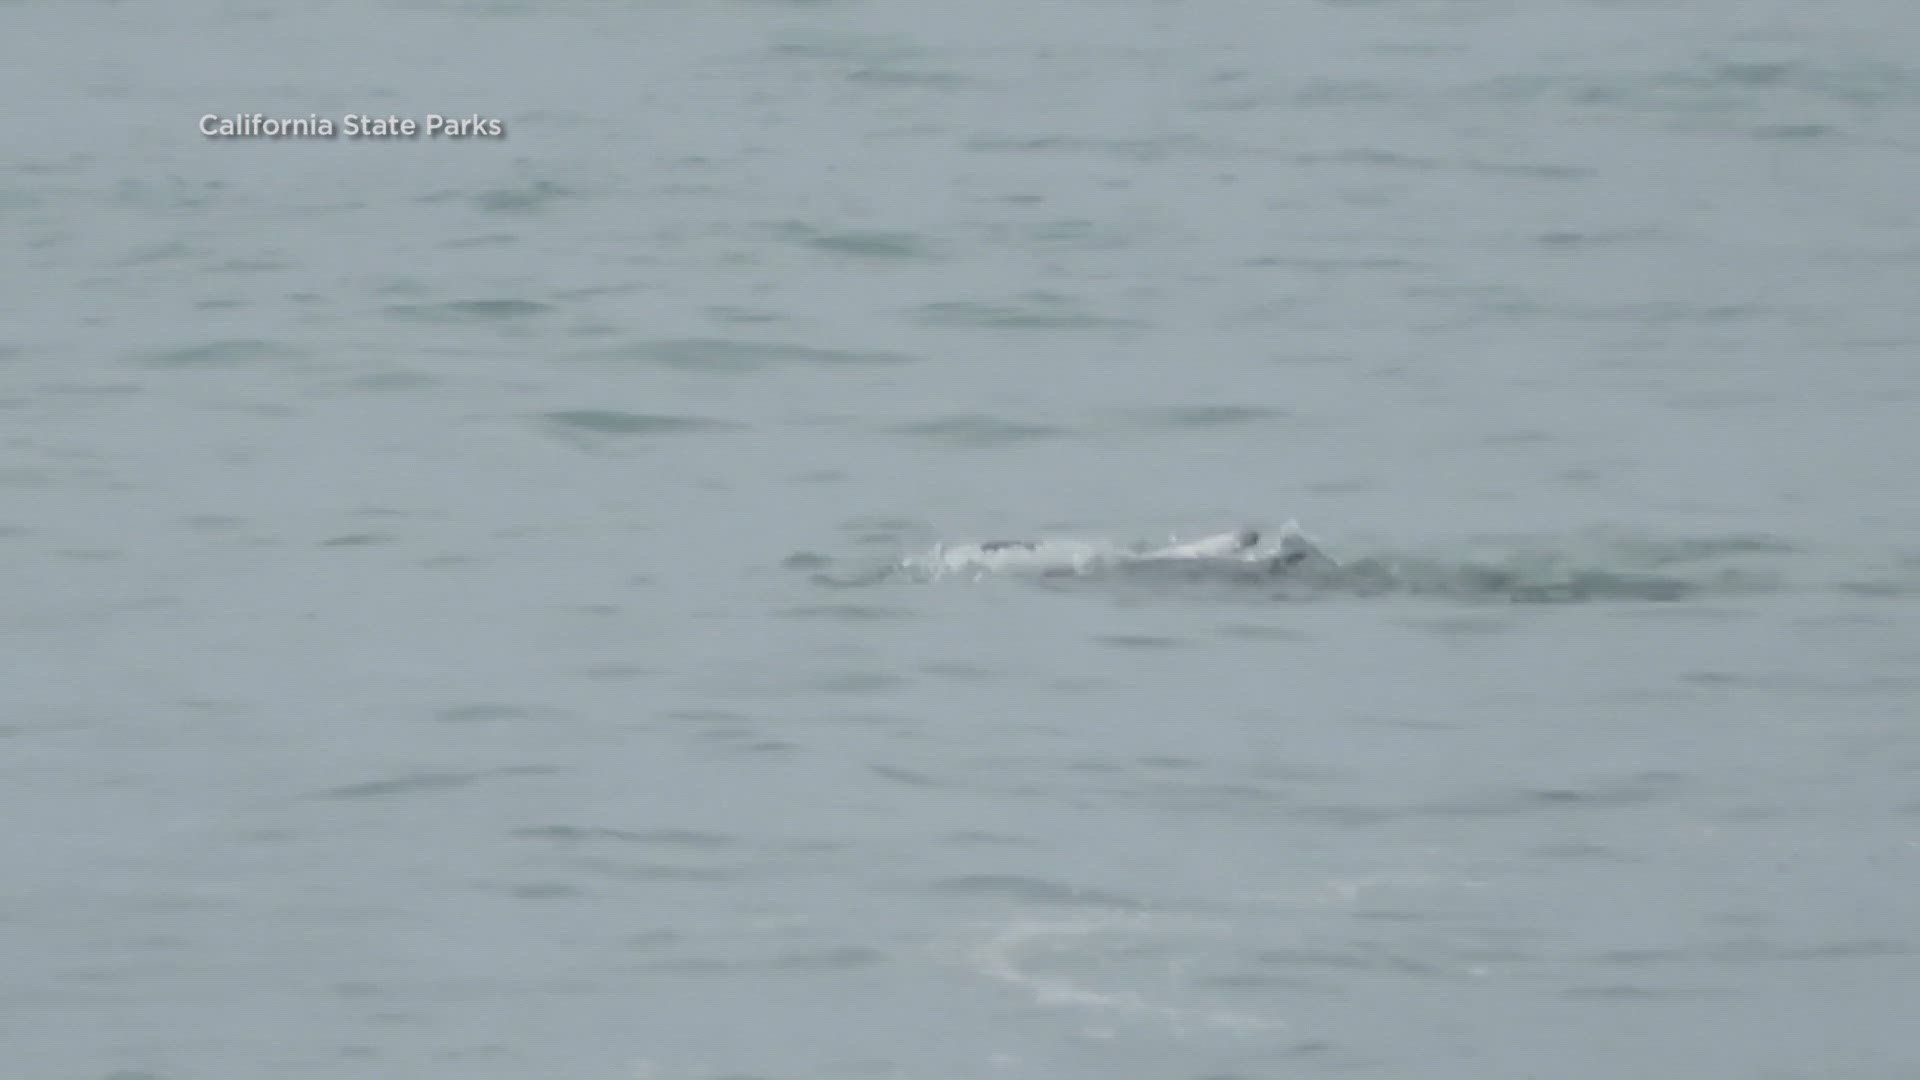 A shark was caught on camera feeding on a dolphin off the coast of La Jolla, about 30-40 yards offshore.